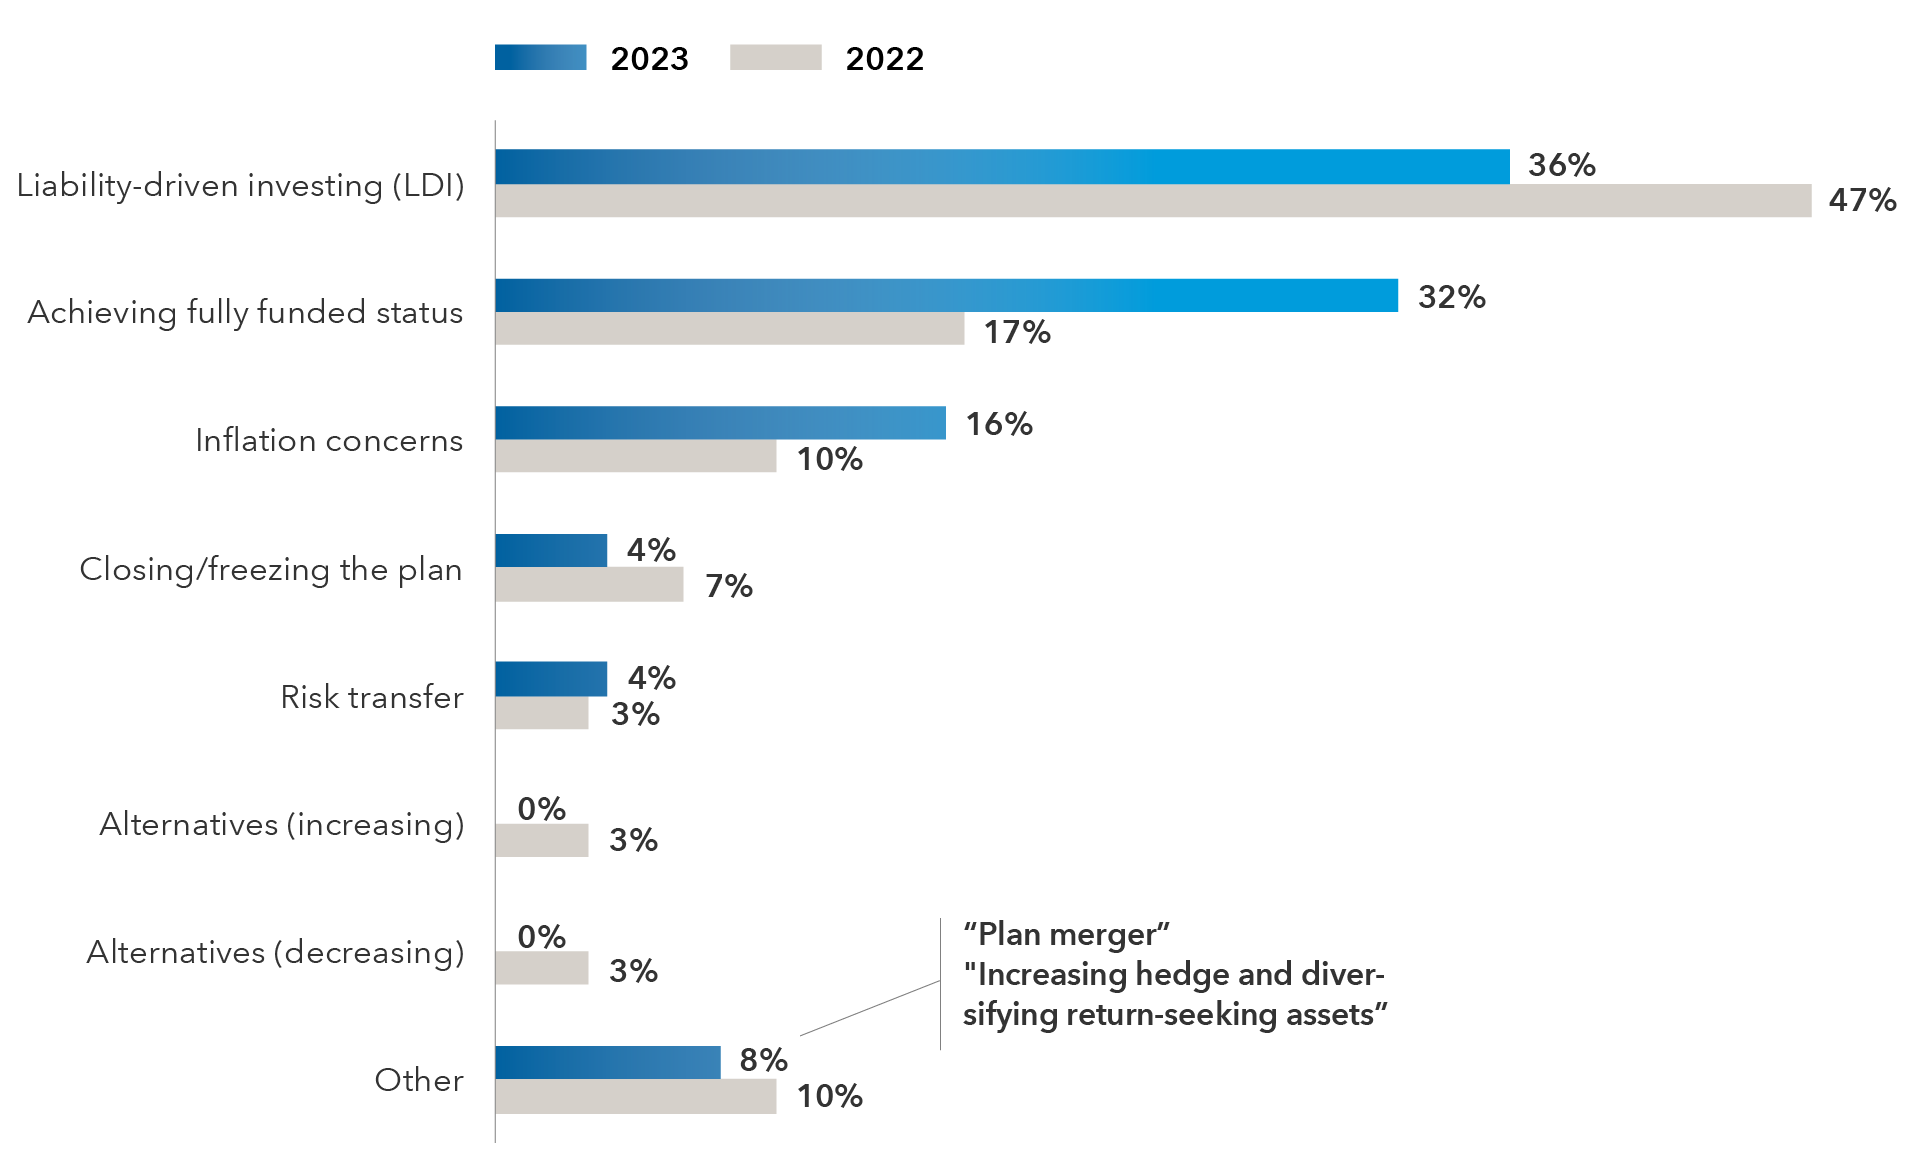 This horizontal bar chart shows DB plans’ top priorities over the next 12 months in the survey for the years 2023 and 2022. Liability-driven investing (LDI): 36% in 2023 and 47% in 2022; achieving fully funded status: 32% in 2023 and 17% in 2022; inflation concerns: 16% in 2023 and 10% in 2022; closing/freezing the plan: 4% in 2023 and 7% in 2022; risk transfer: 4% in 2023 and 3% in 2022; alternatives (increasing): 0% in 2023 and 3% in 2022; alternatives (decreasing): 0% in 2023 and 3% in 2022; and other: 8% in 2023 and 10% in 2022. Among the verbatim “other” responses for 2023 were: “Plan merger” and “increasing hedge and diversifying return-seeking assets.”